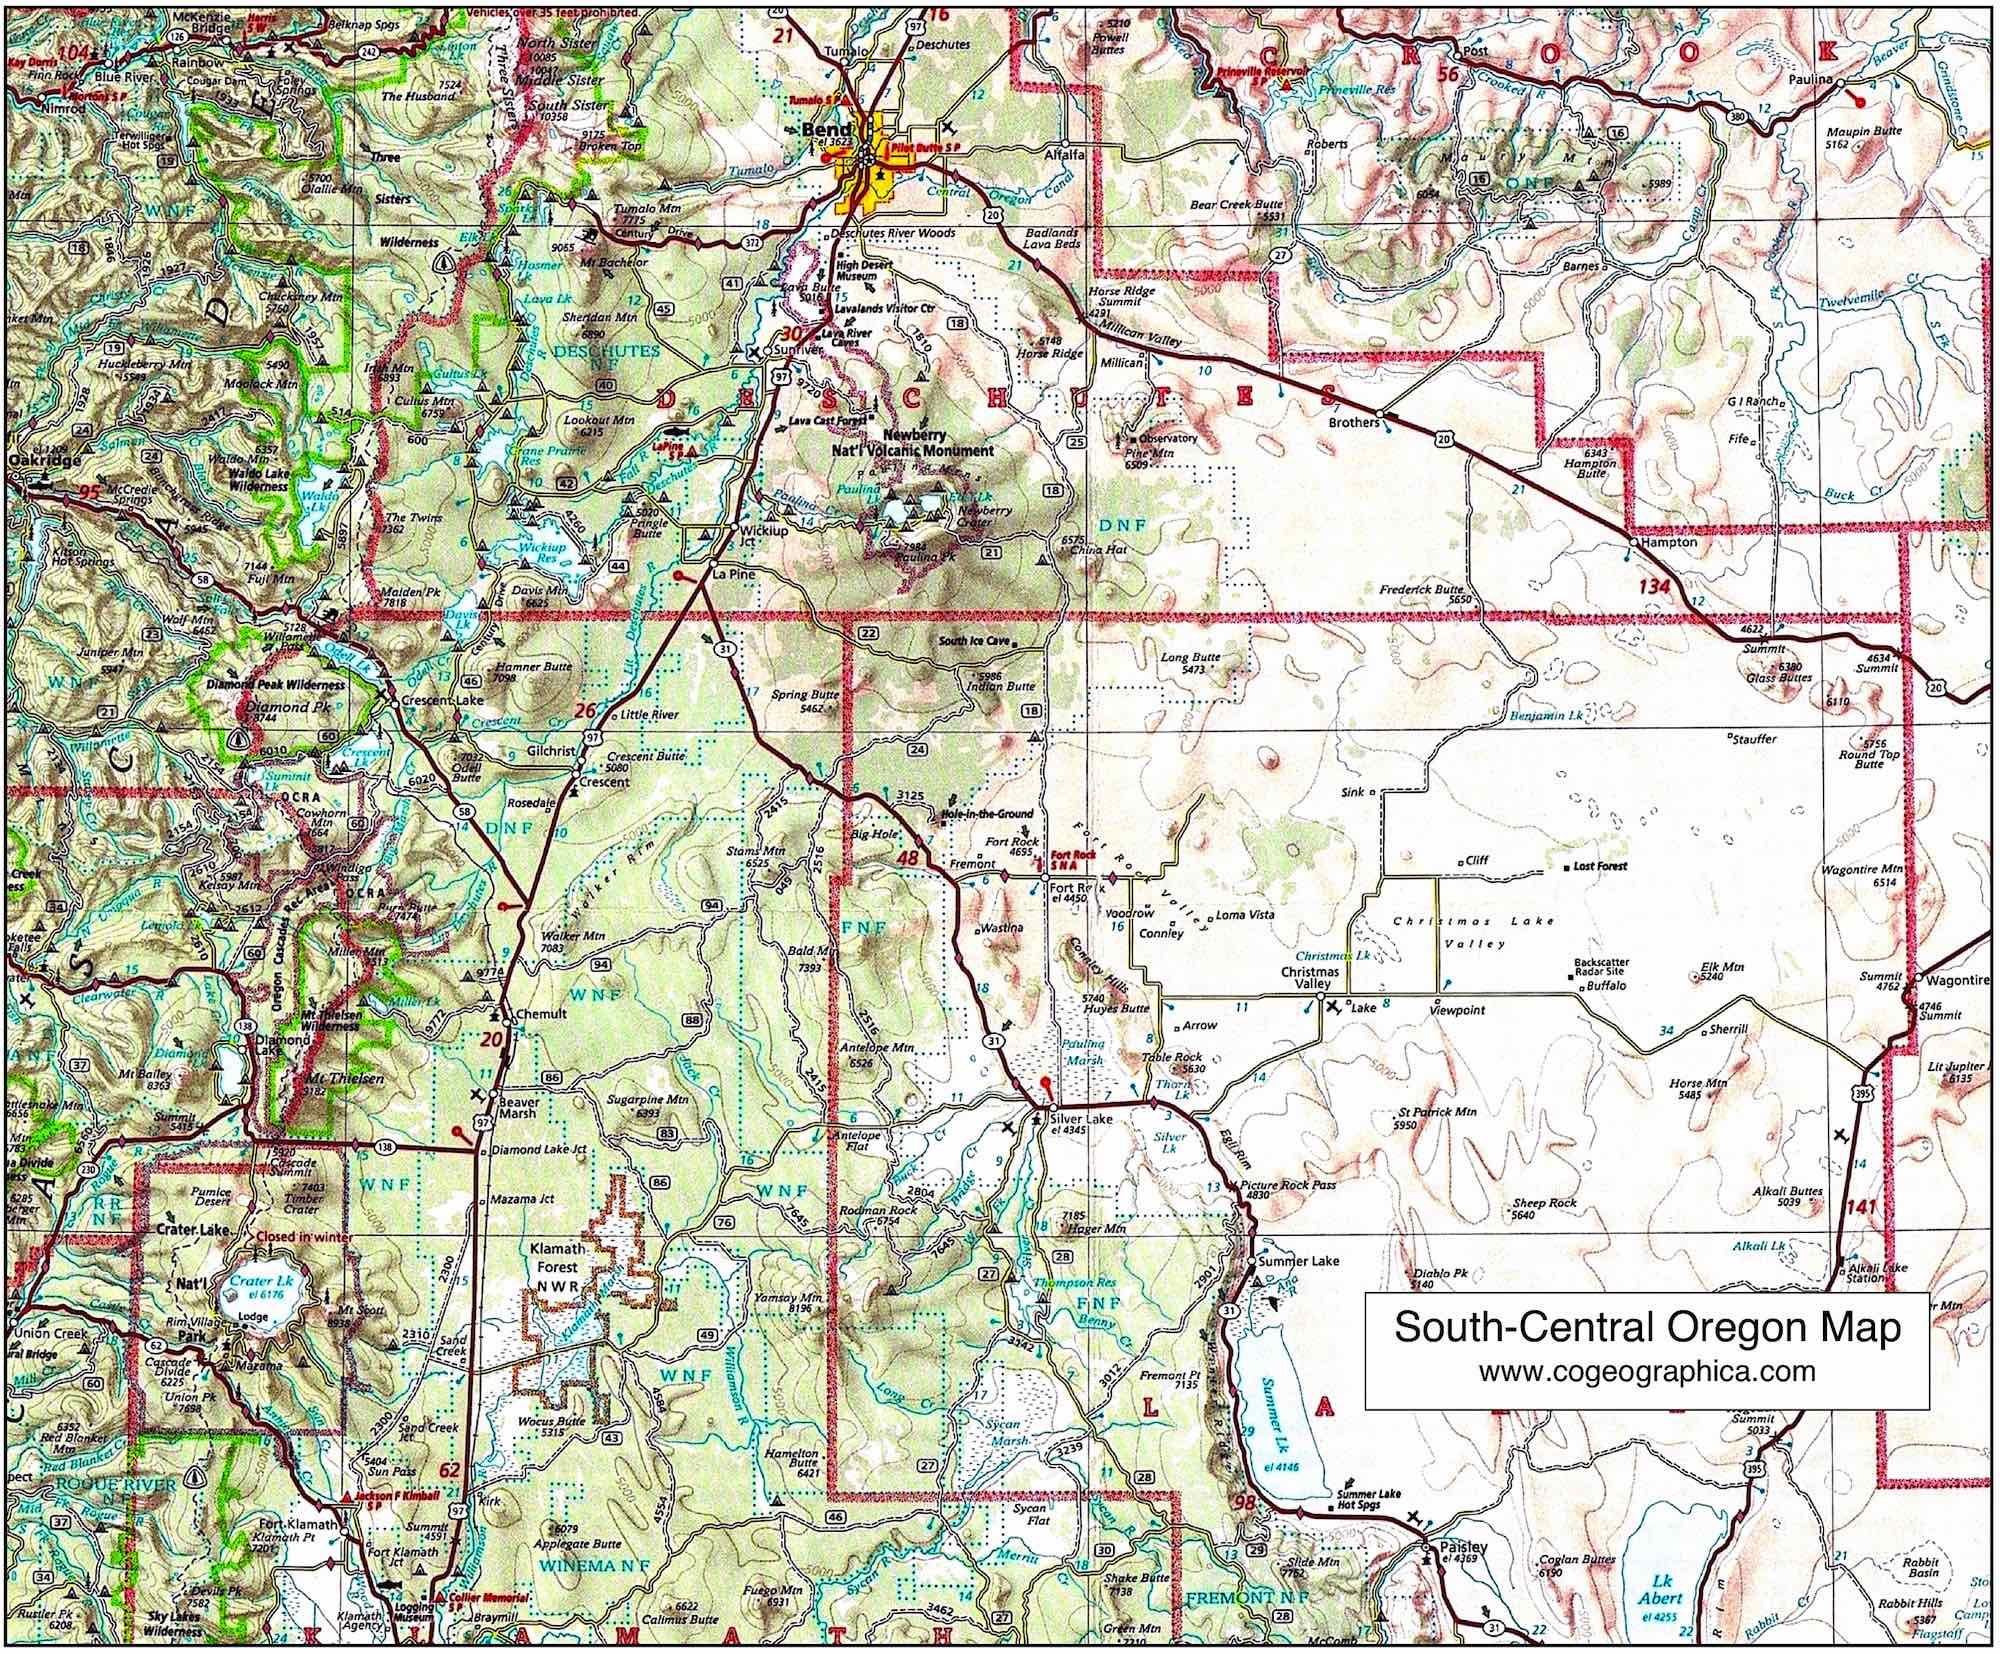 Map of South-Central Oregon